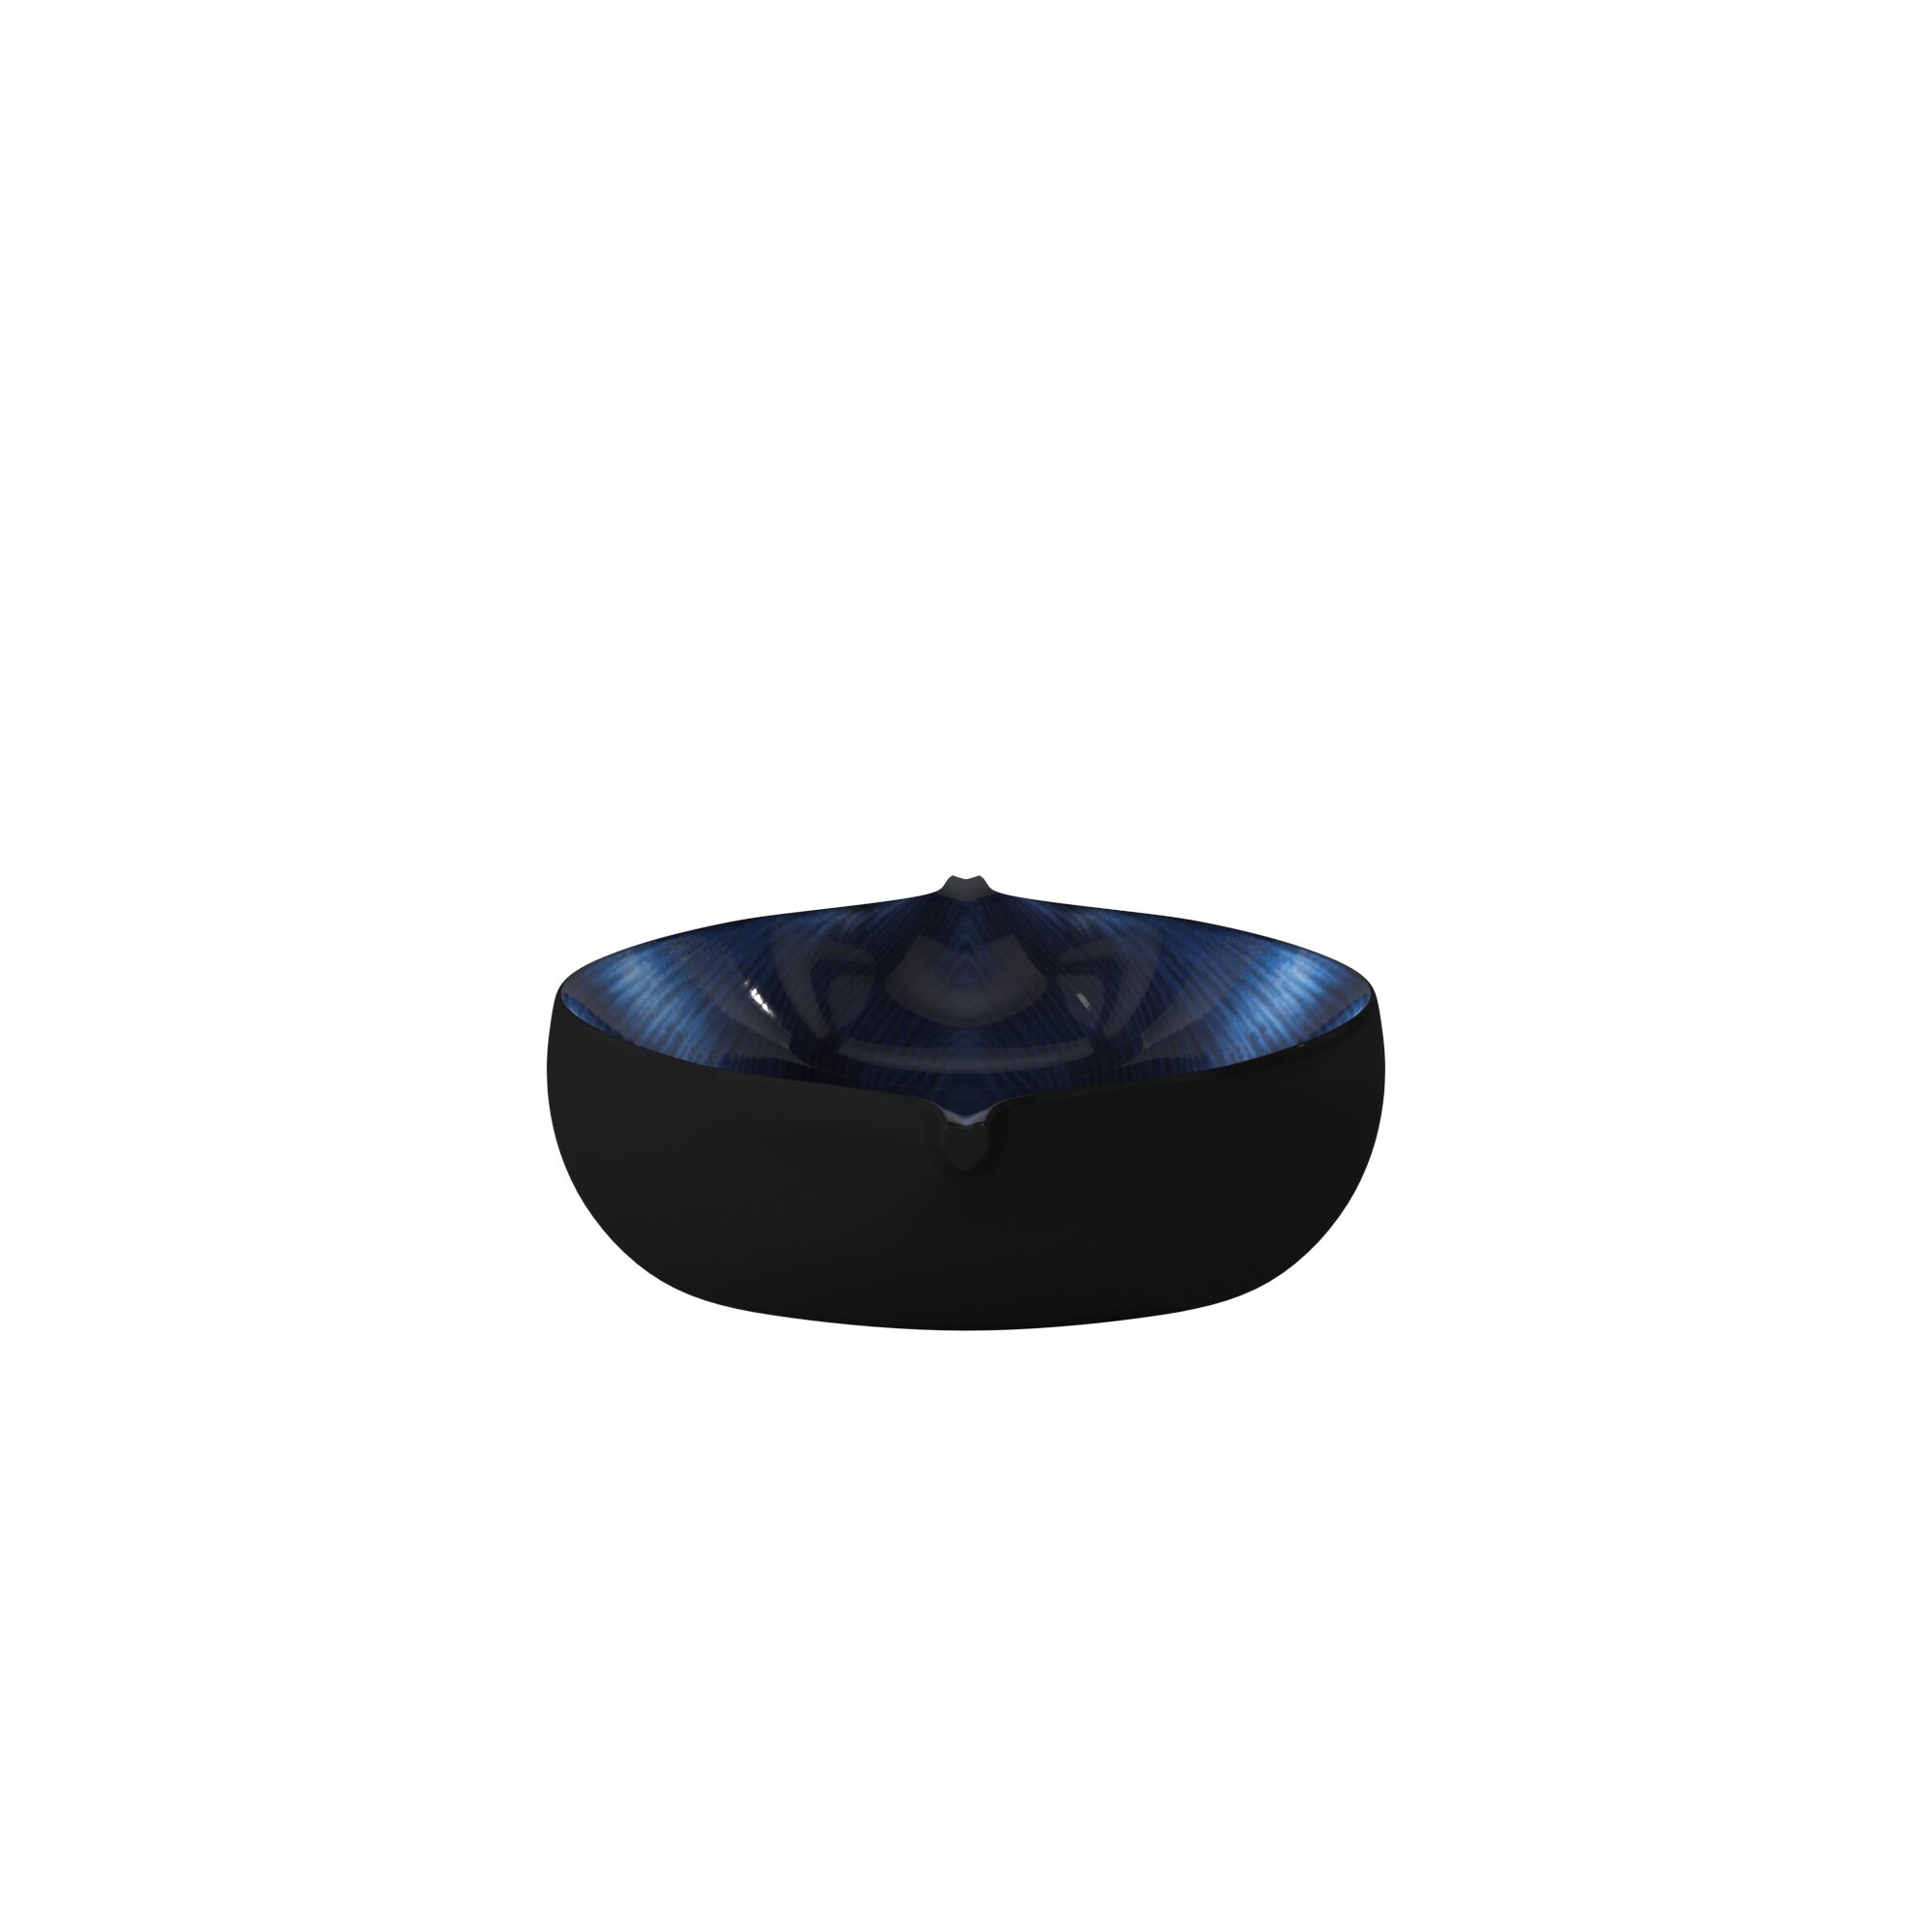 Sleek Blue and Black Lacquer Centerpiece Eye Bowl